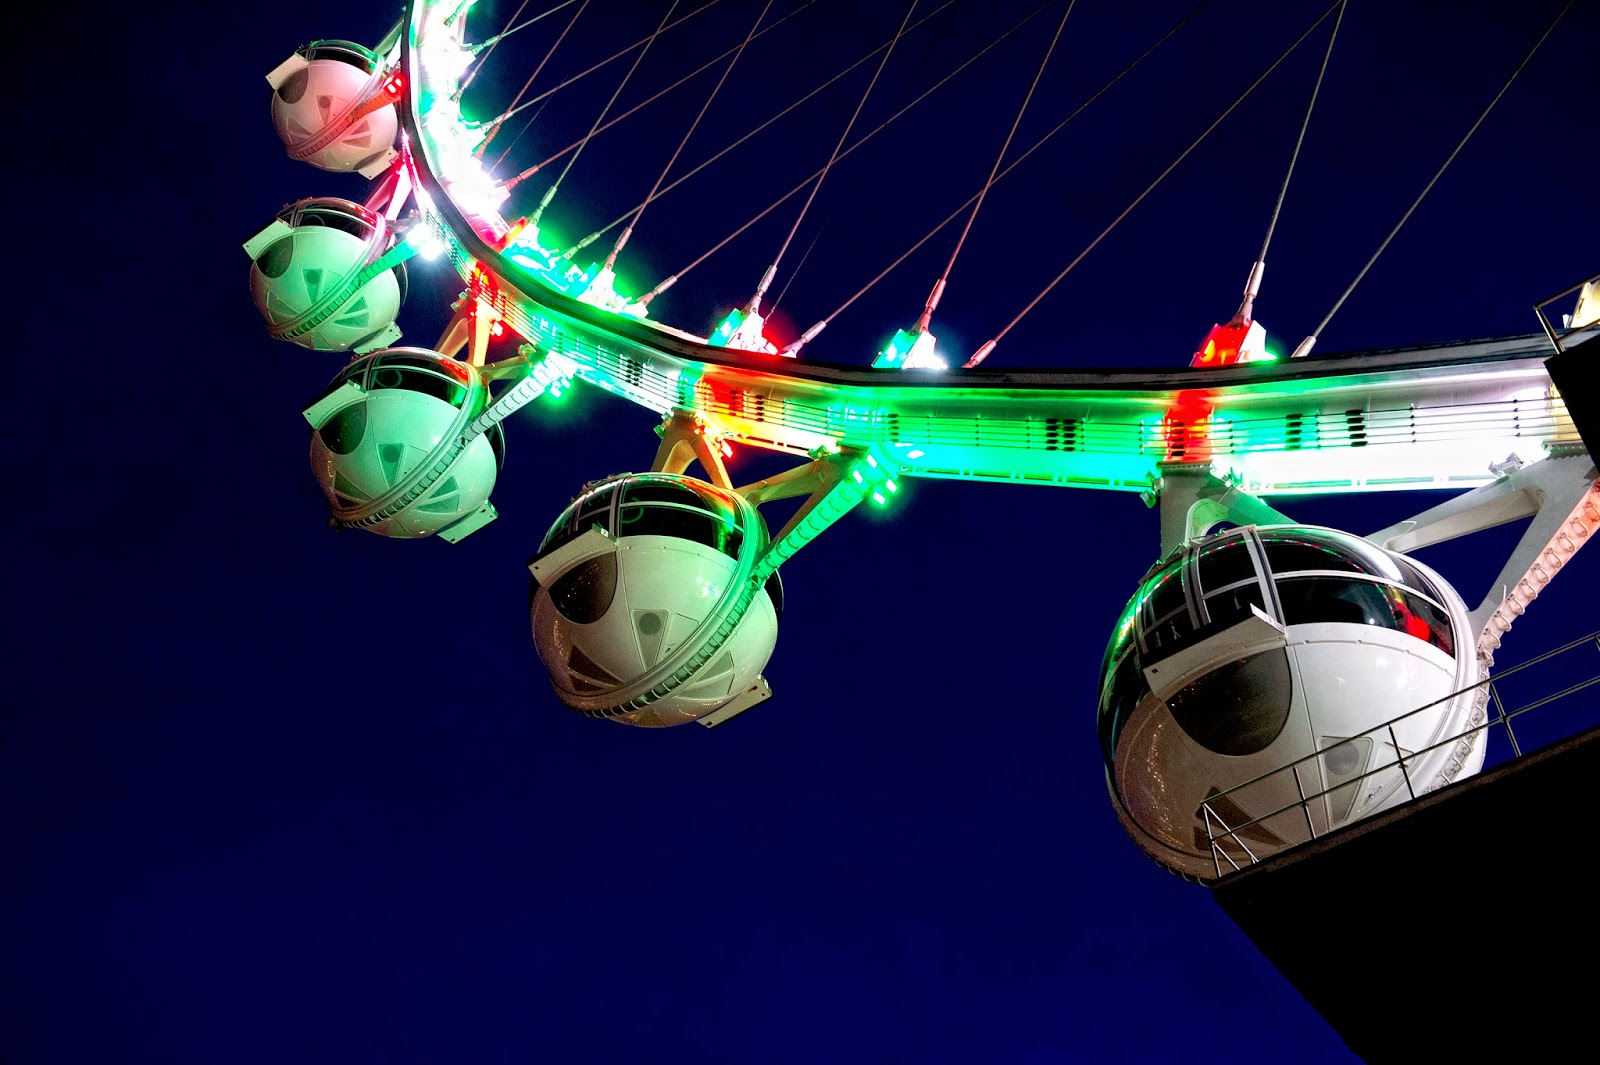 The Linq’s High Roller Observation Wheel Enhances The Iconic Las Vegas Skyline with HARMAN’s Martin Professional Lighting